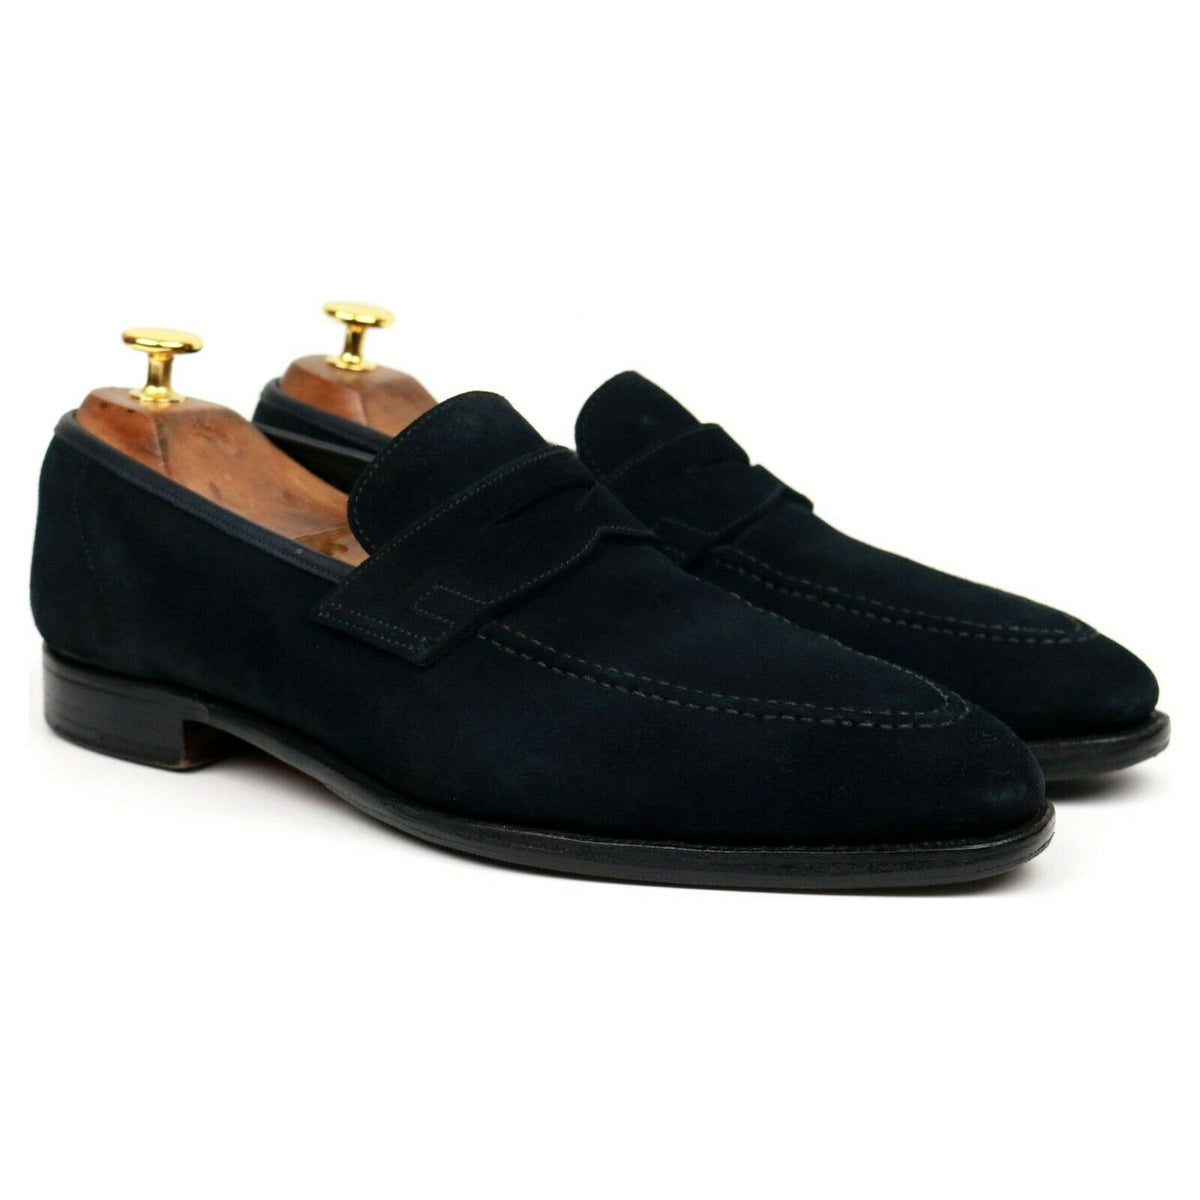 navy loafers uk